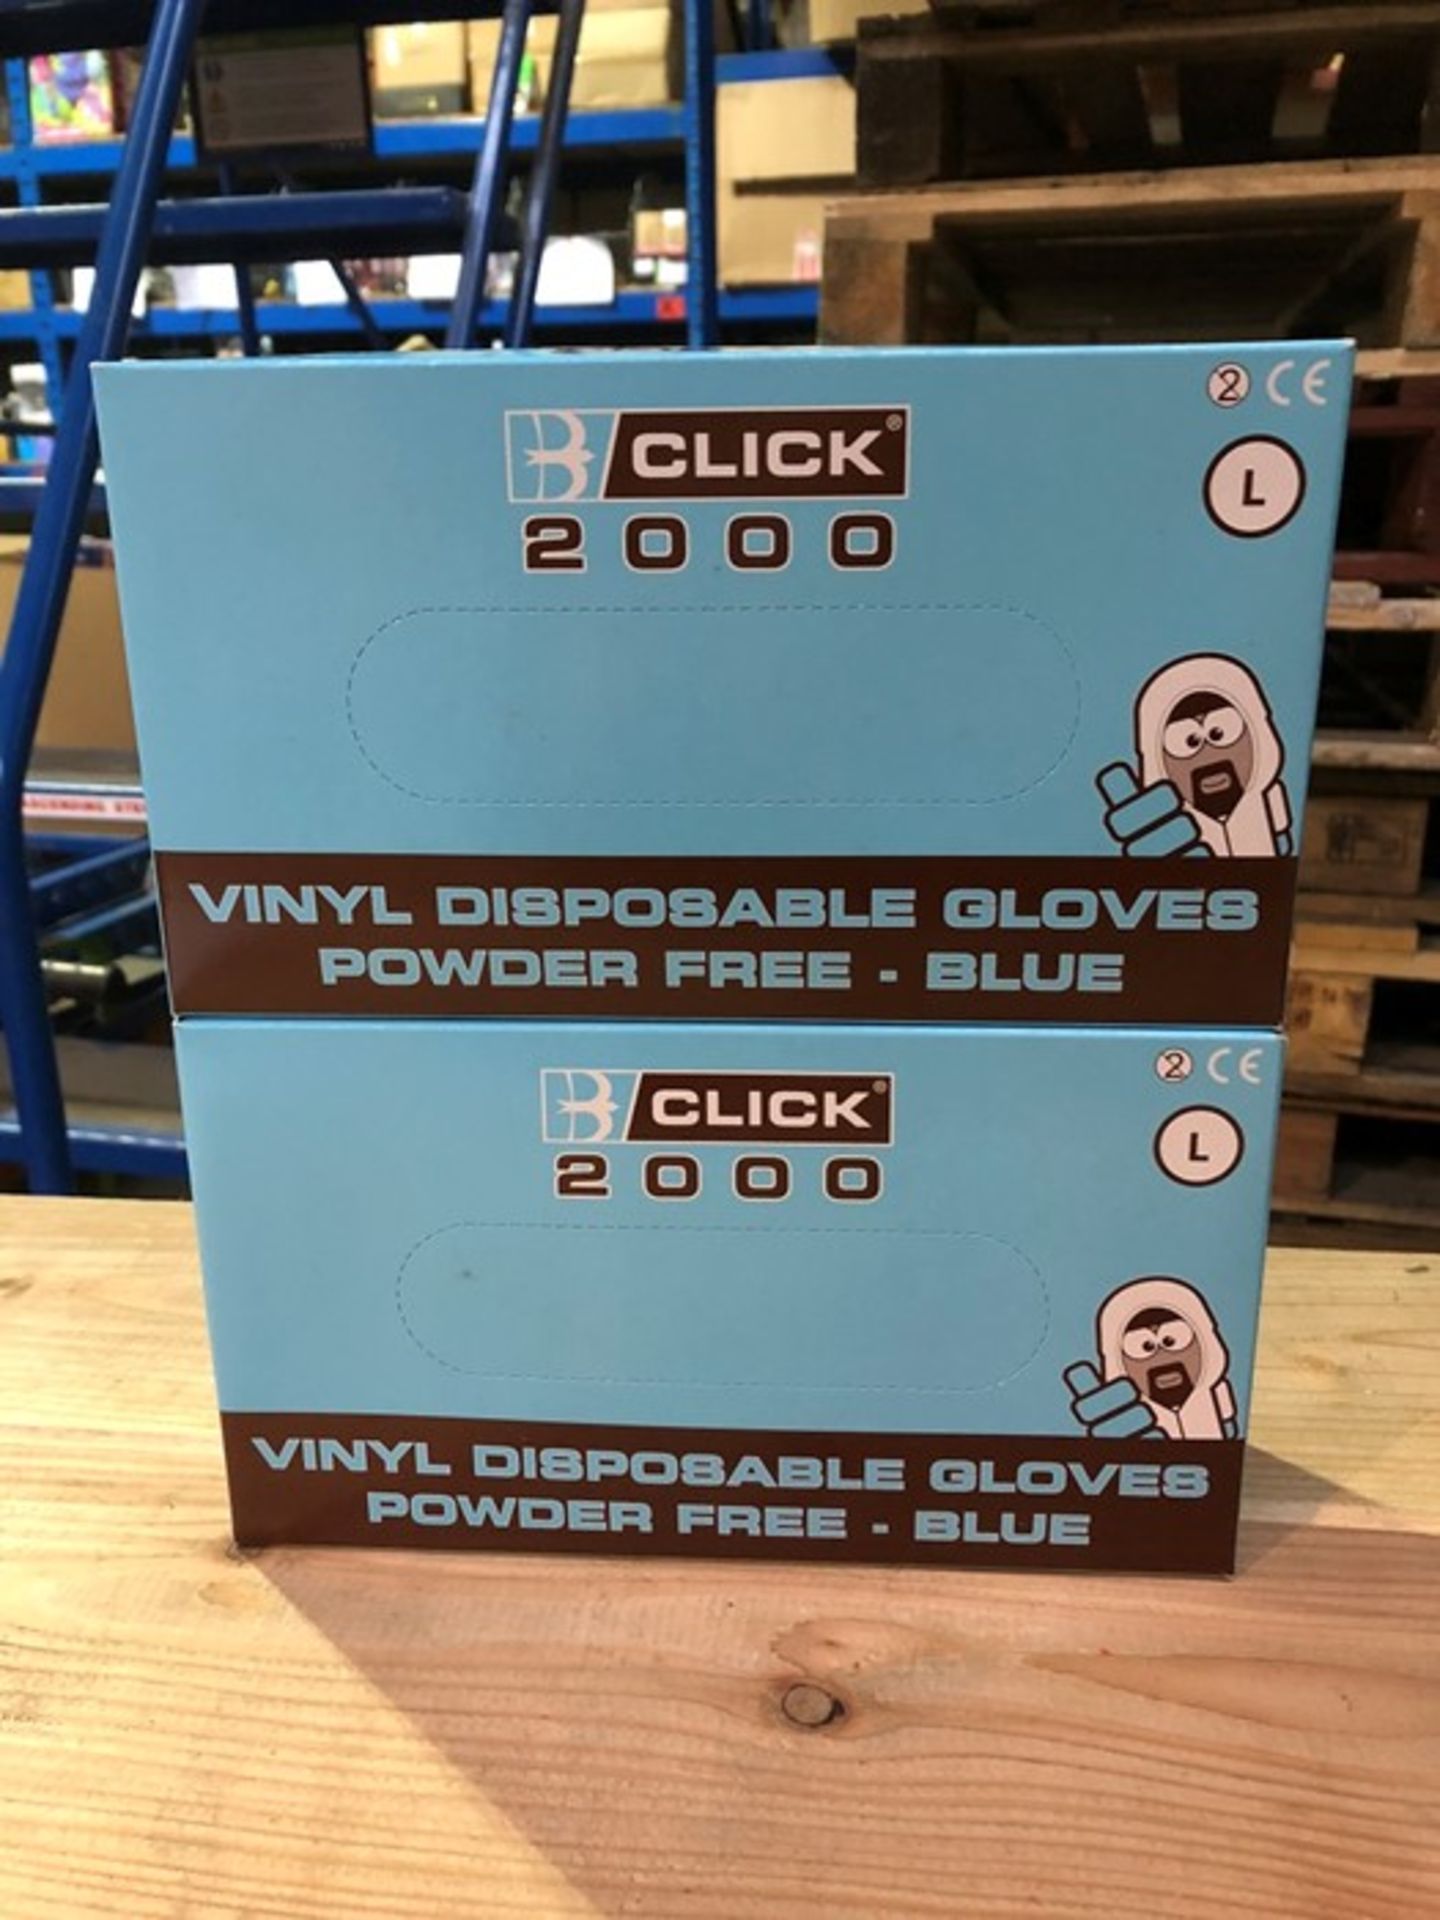 1 LOT TO CONTAIN 2 BOXES OF CLICK 2000 VINYL DISPOSABLE GLOVES POWDER FREE IN BLUE / SIZE: L (PUBLIC